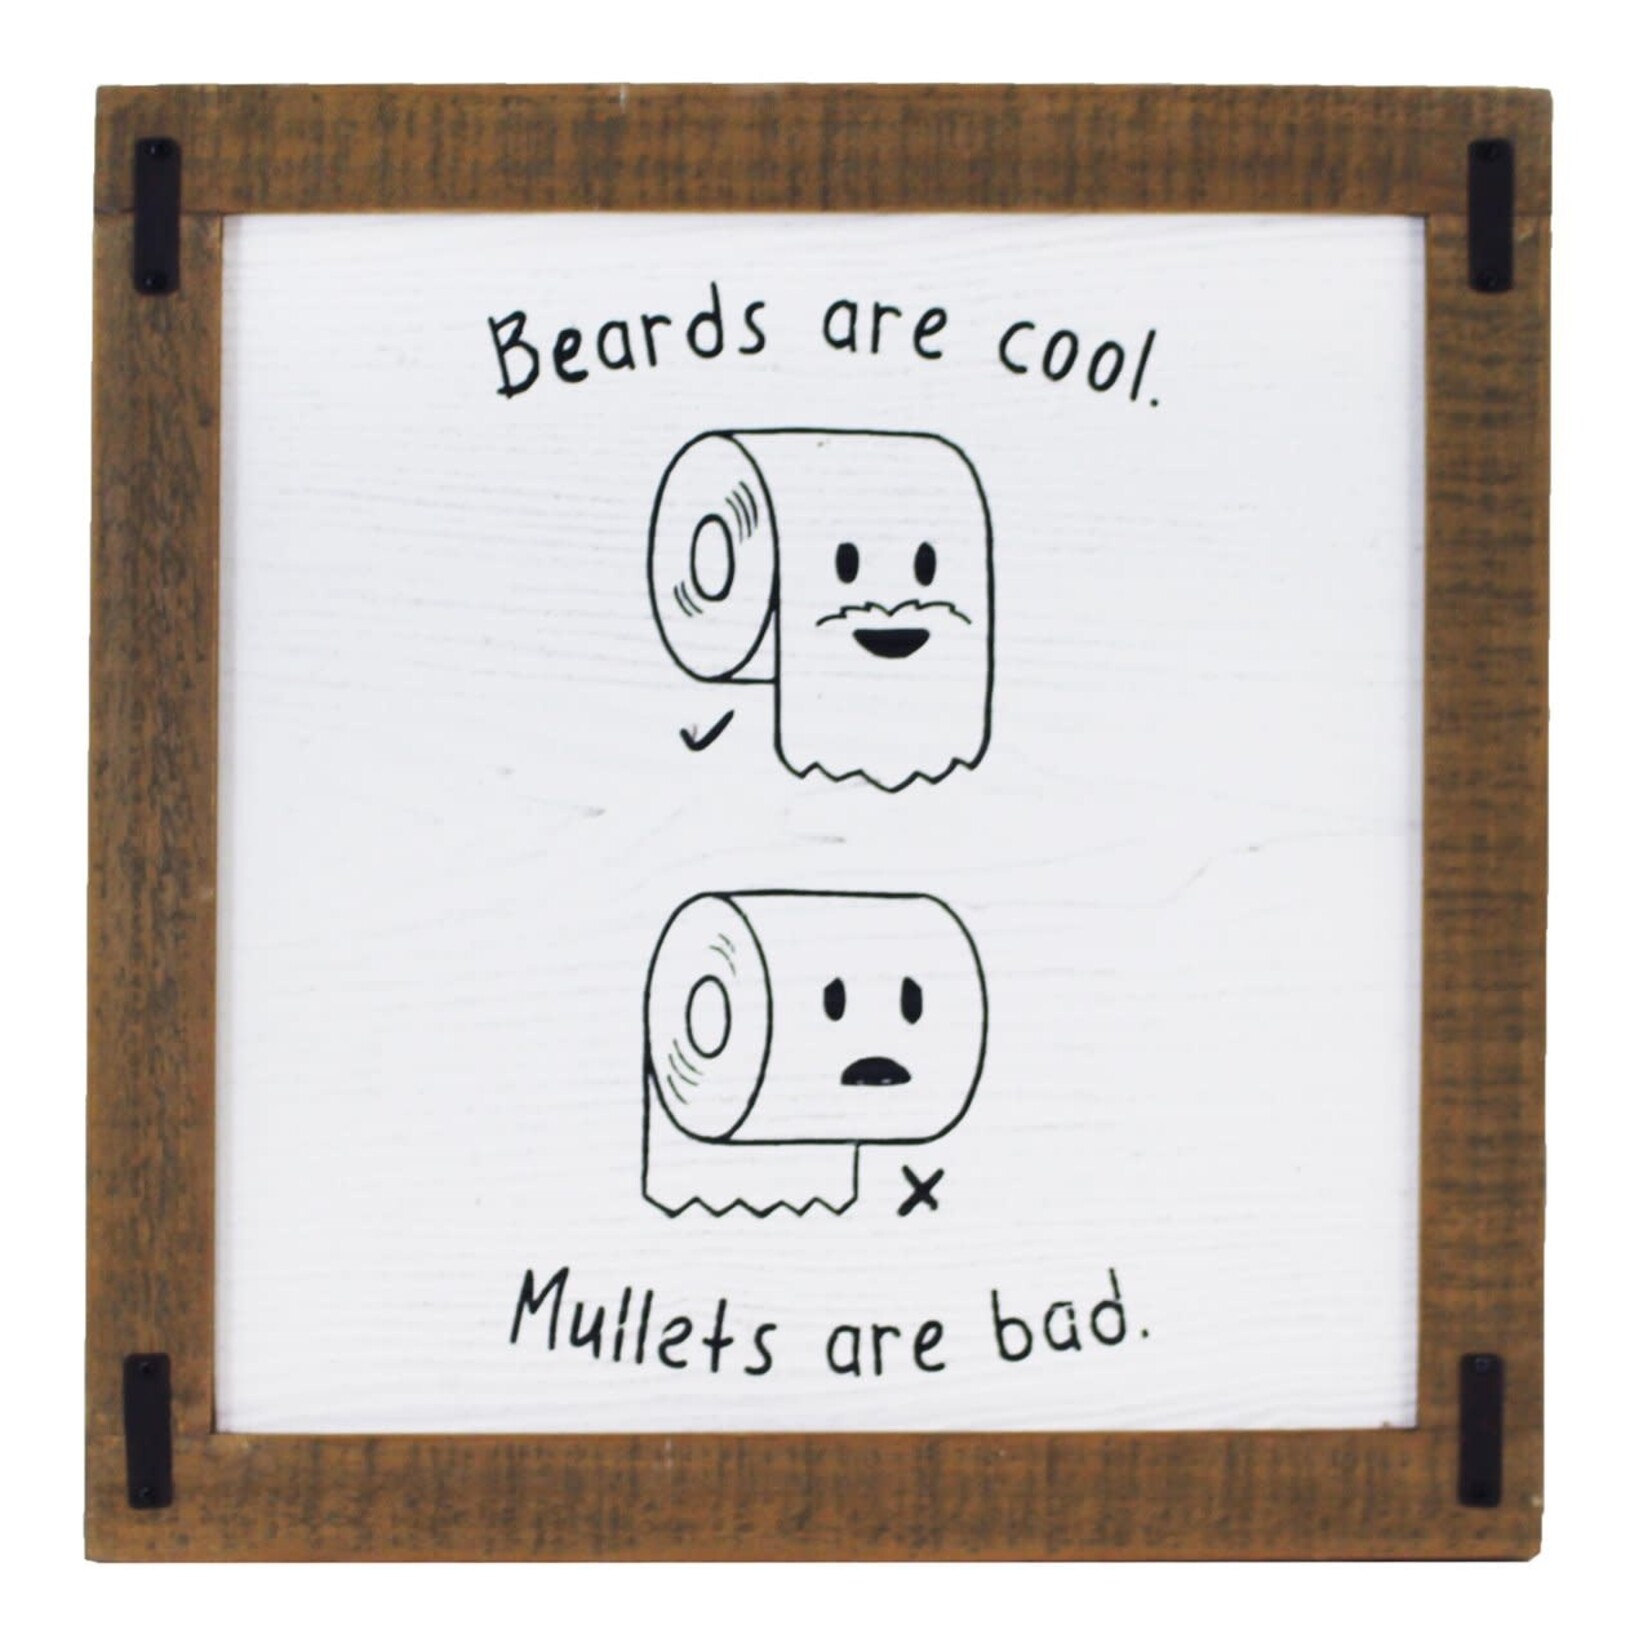 Breads are cool - Wooden wall art